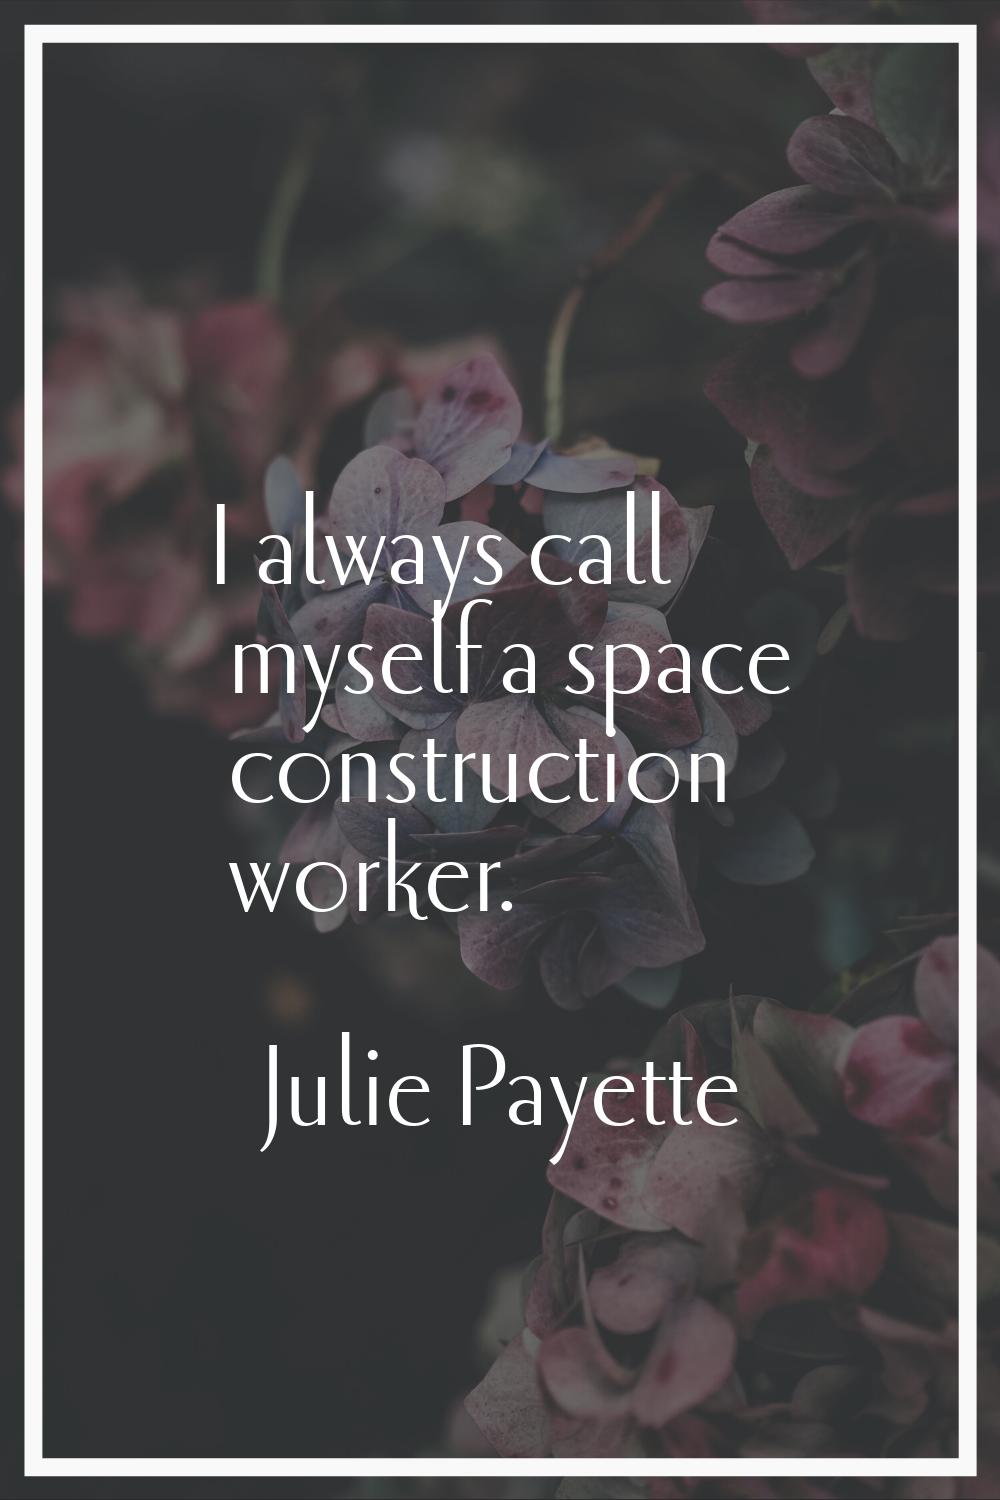 I always call myself a space construction worker.